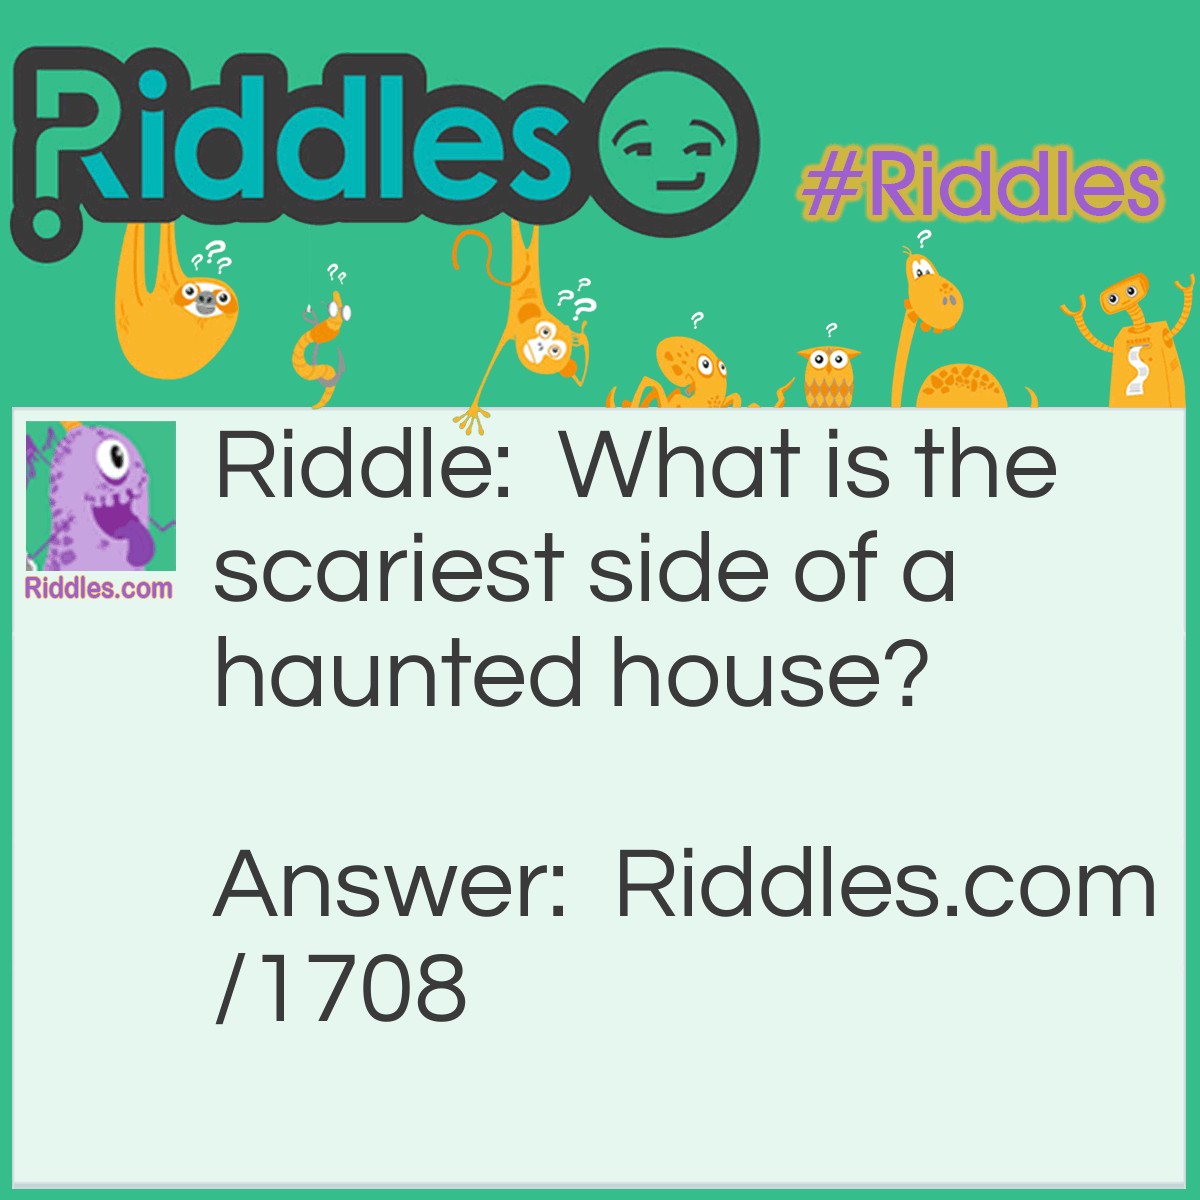 Riddle: What is the scariest side of a haunted house? Answer: The inside.